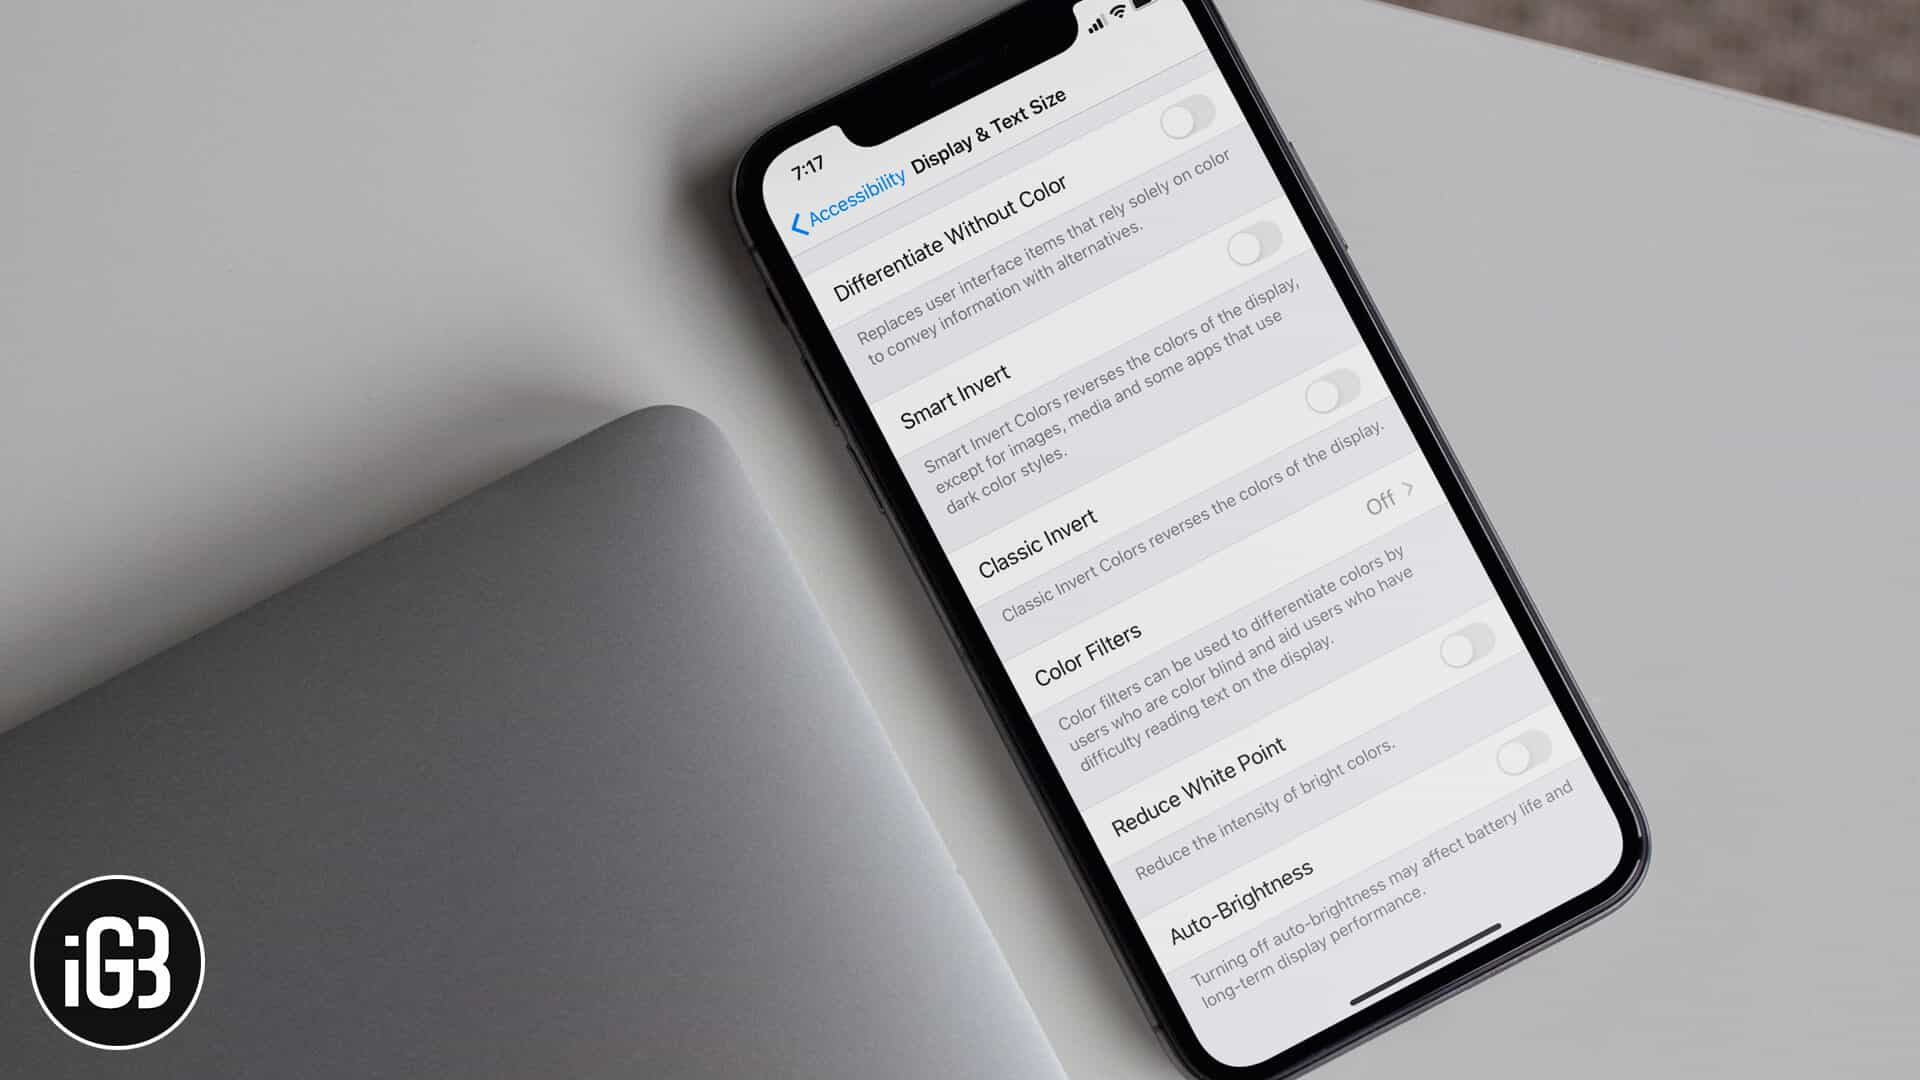 How to turn off auto brightness on iphone and ipad